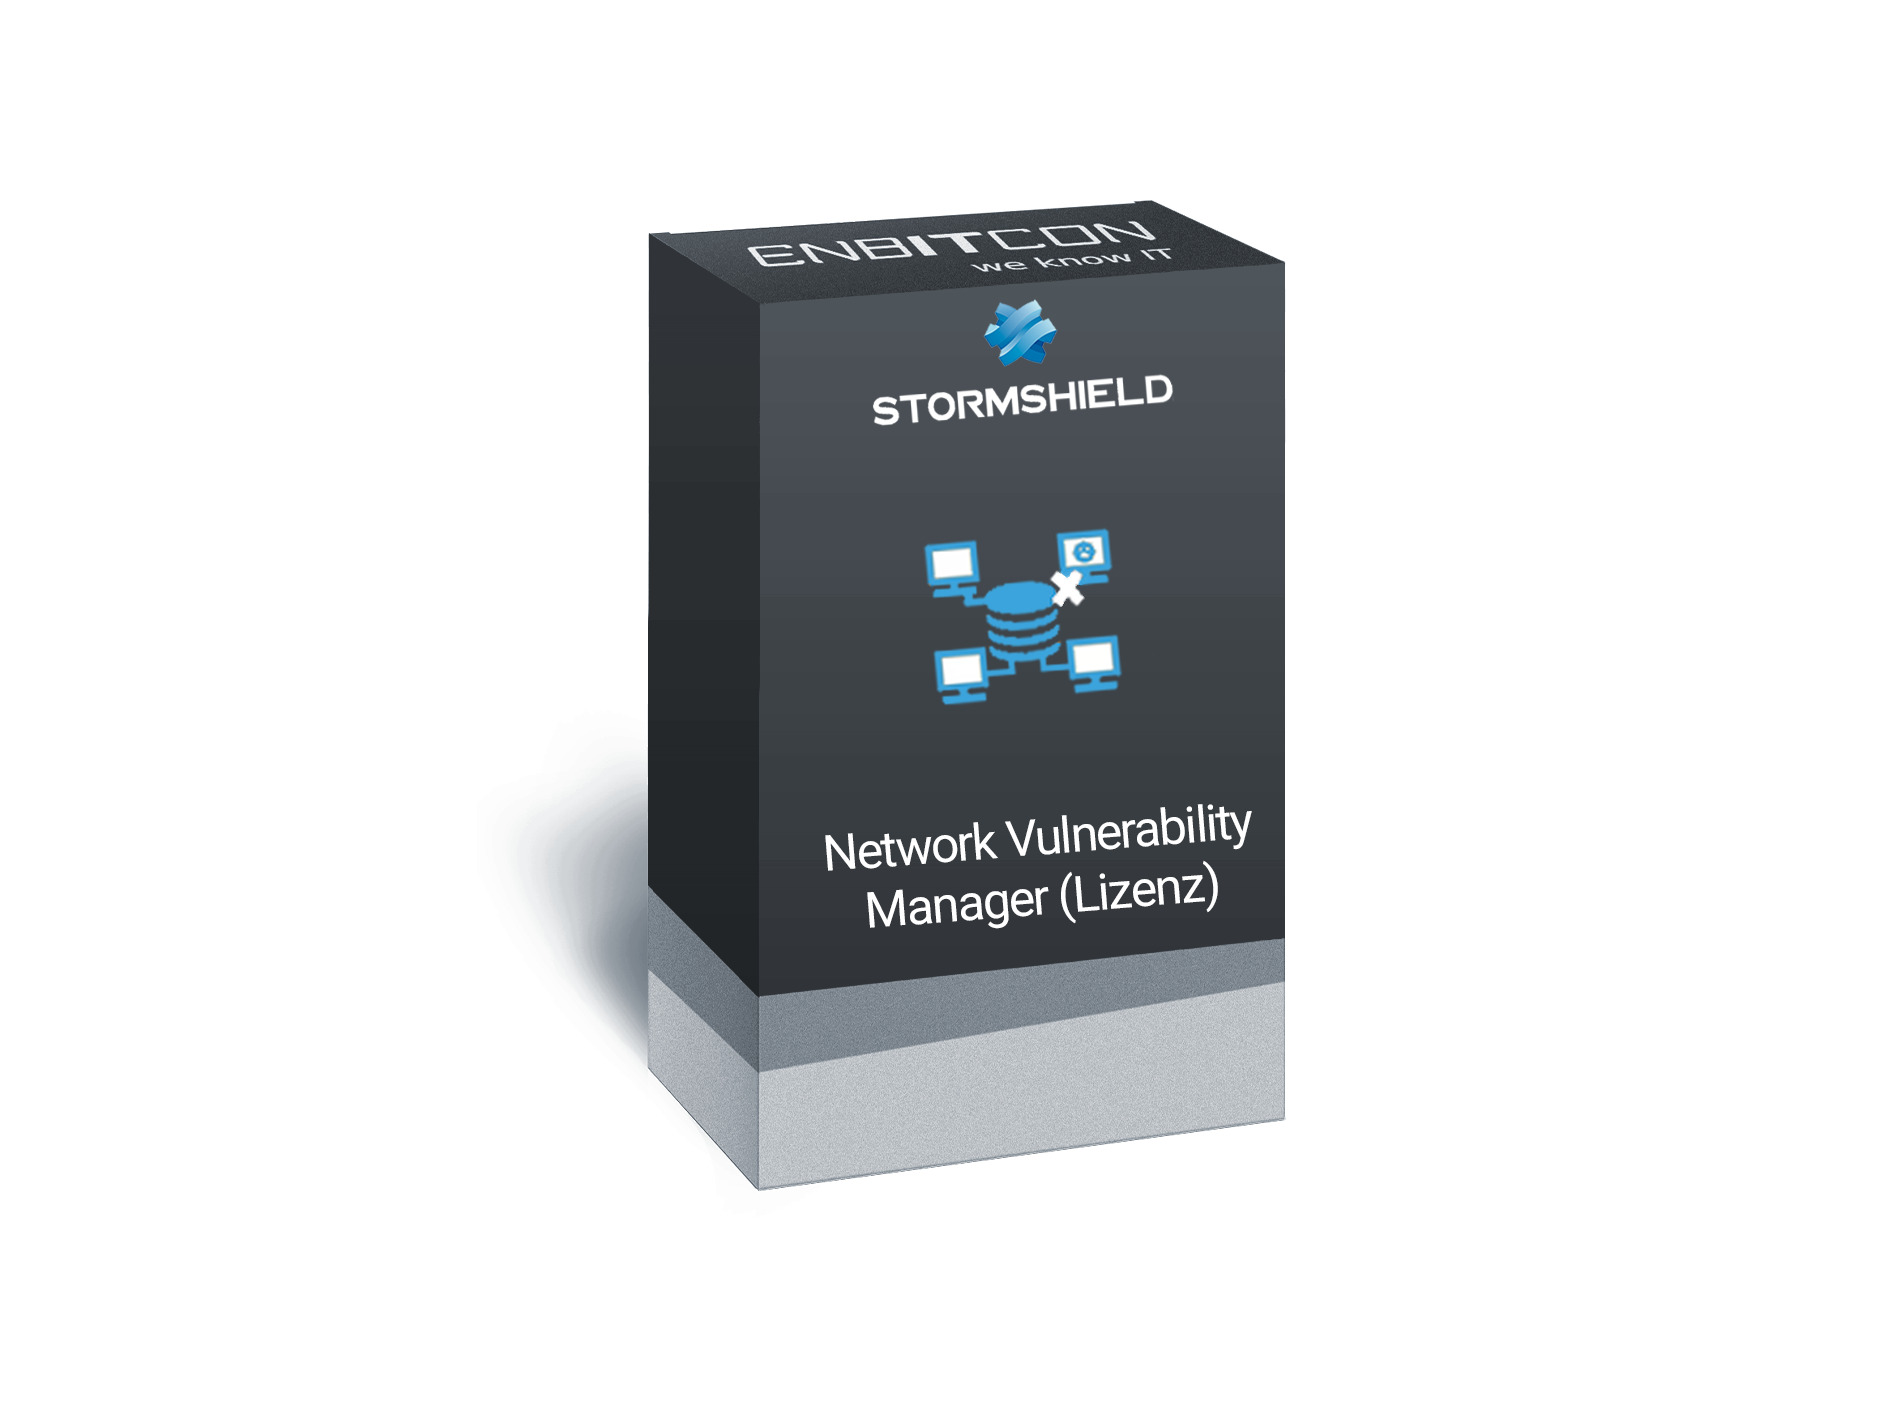 Stormshield SN910 Network Vulnerability Manager option